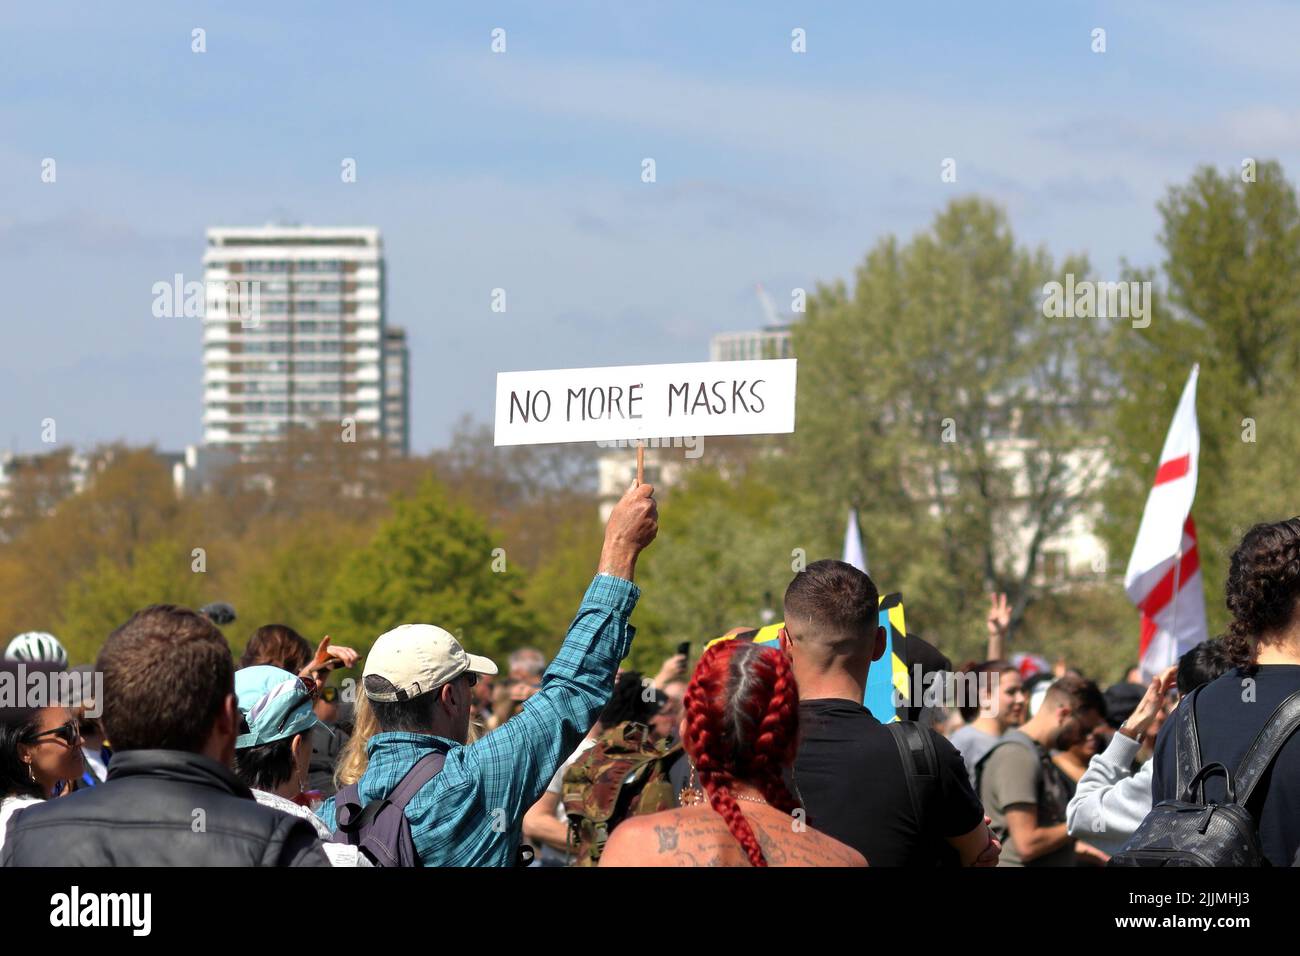 London, UK - April 24, 2021: 'Unite for Freedom' protest by covid-19 sceptics, demonstrators opposing lockdown, vaccination, mask-wearing, etc. Stock Photo